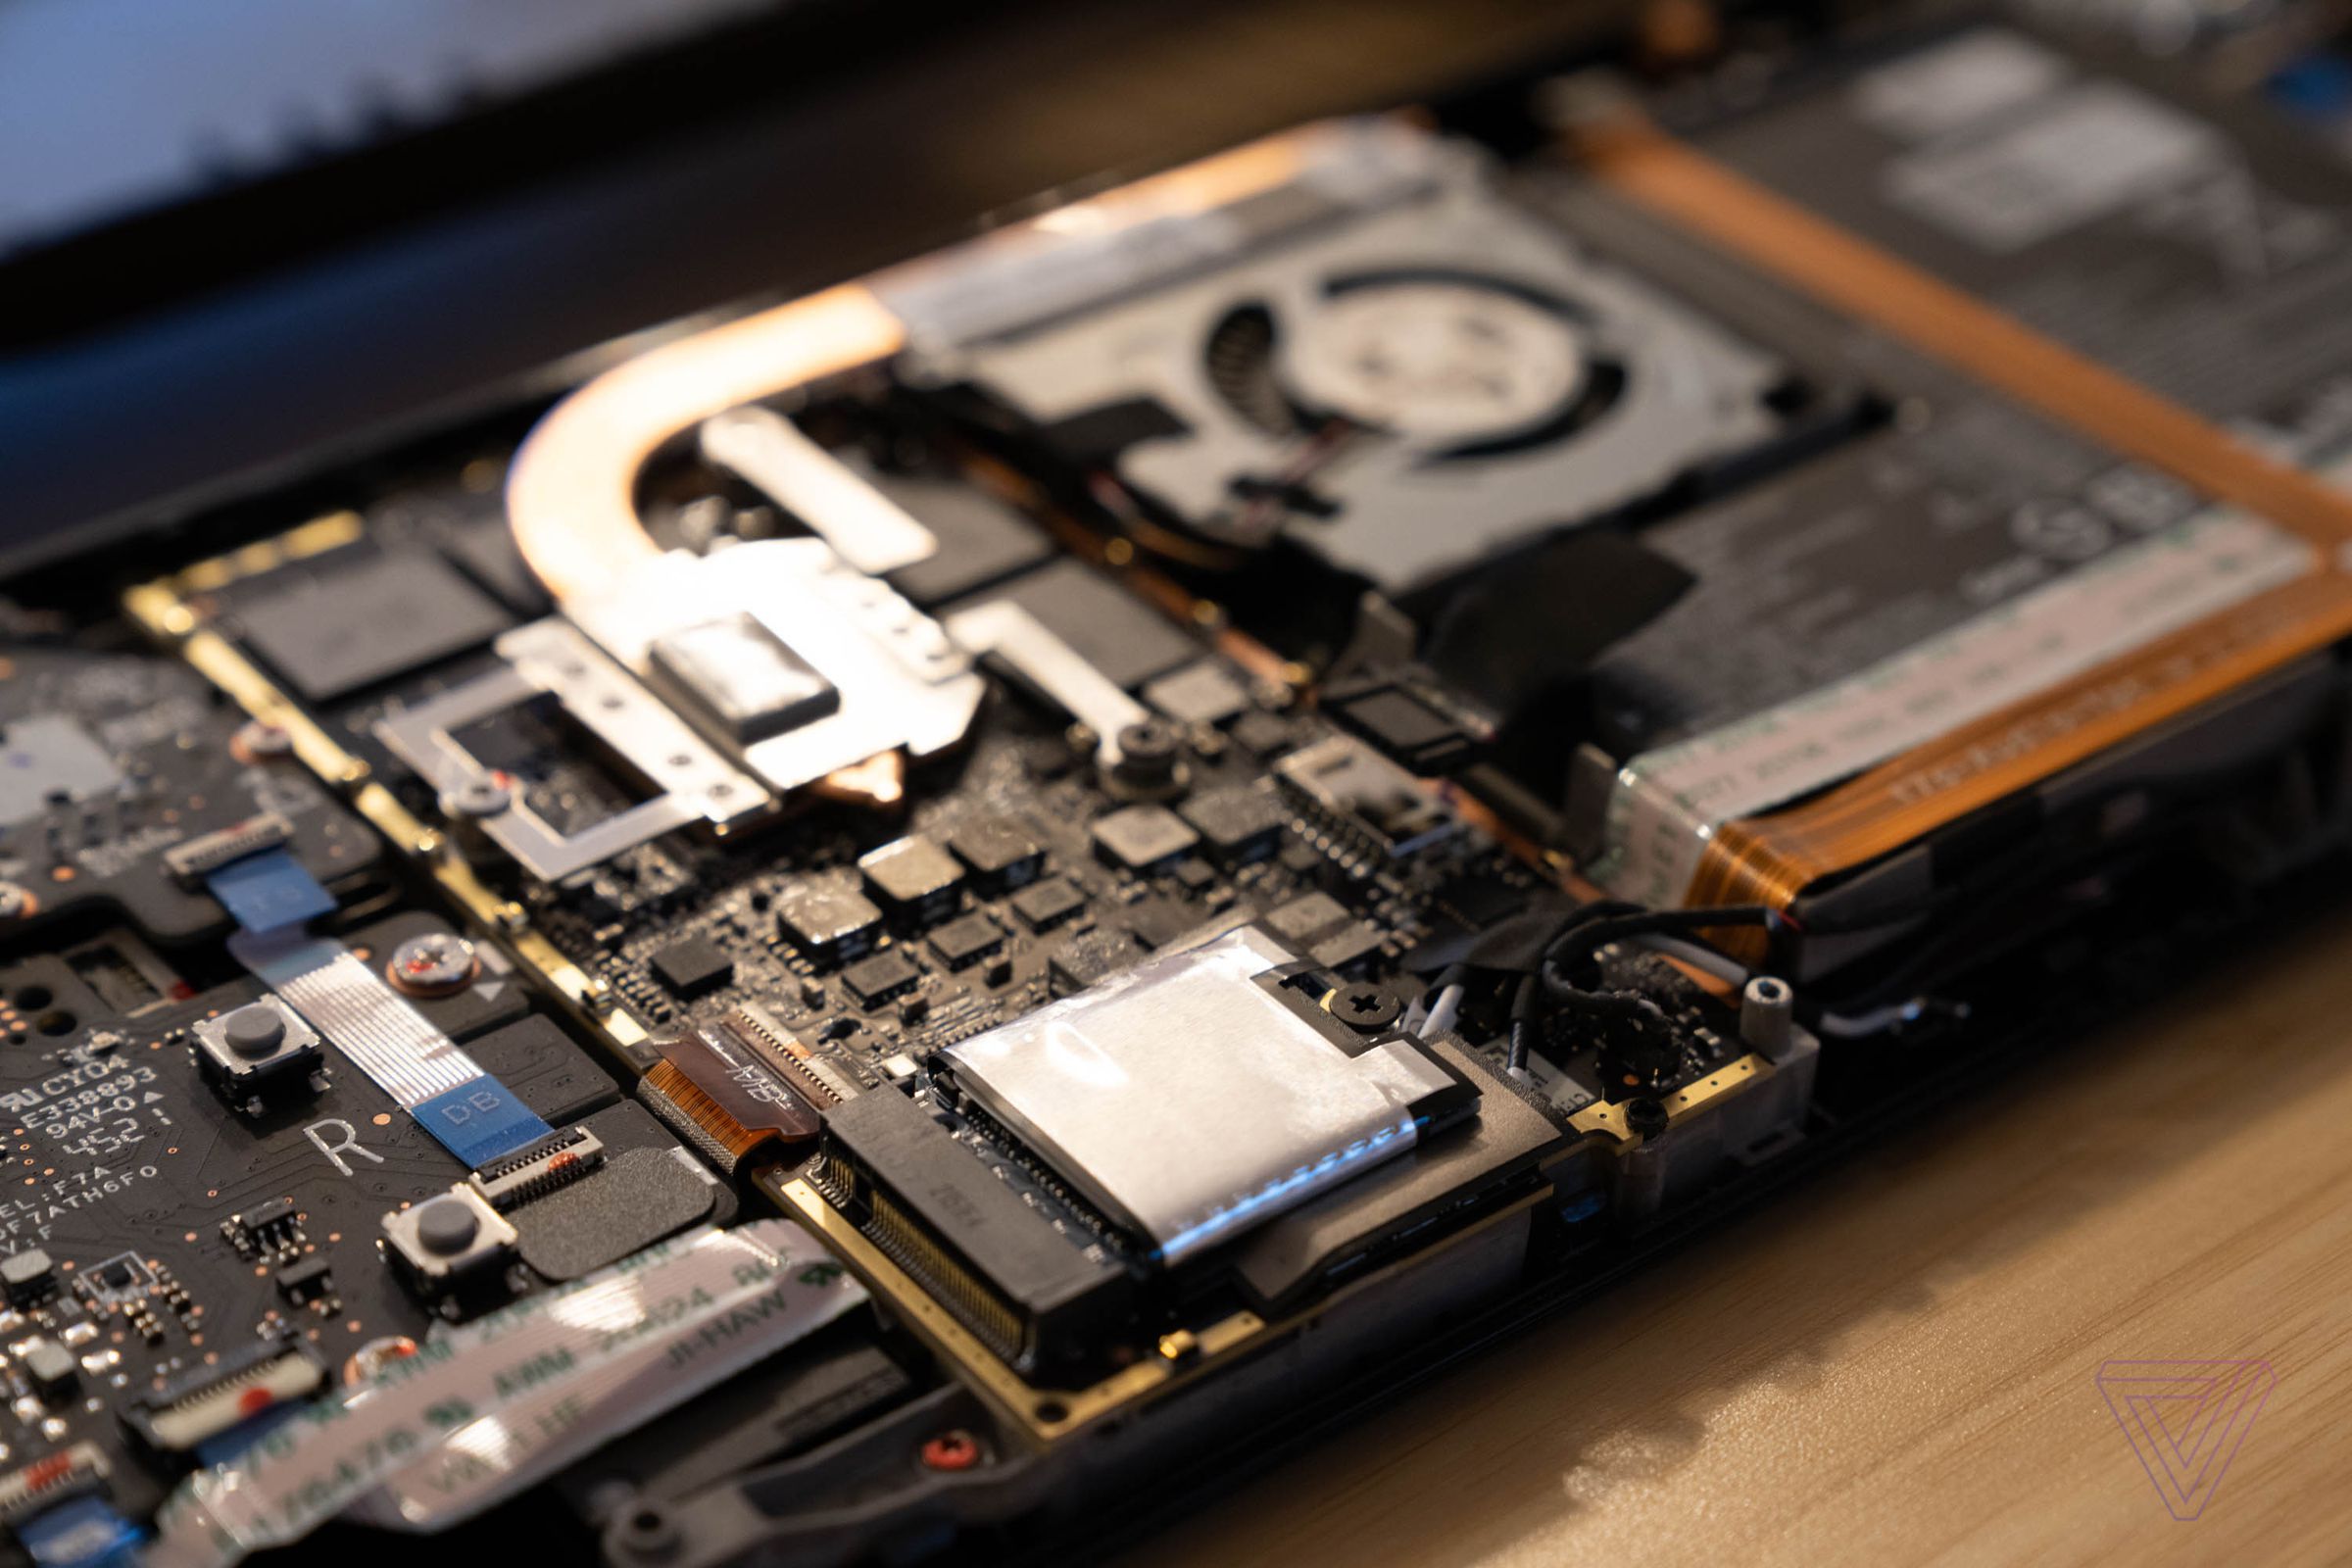 The Steam Deck’s SSD is inside the silver square. That’s the EMI shield, which can slide off or pop open.